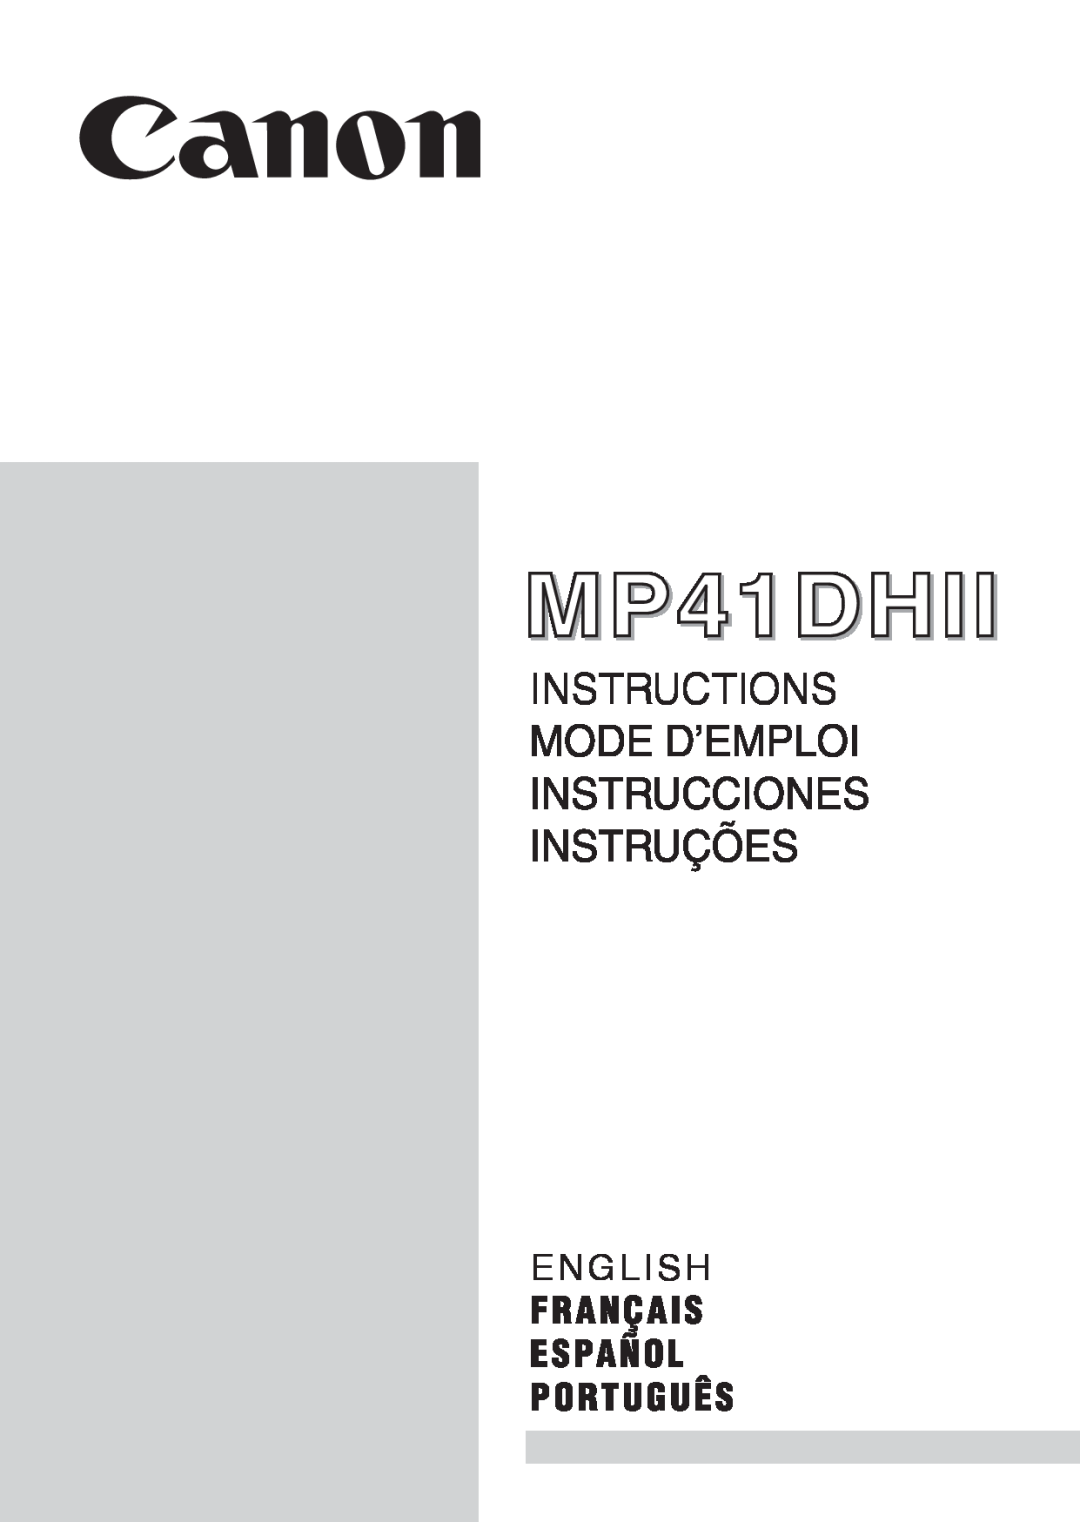 Canon MP41DHII manual Instructions, English 